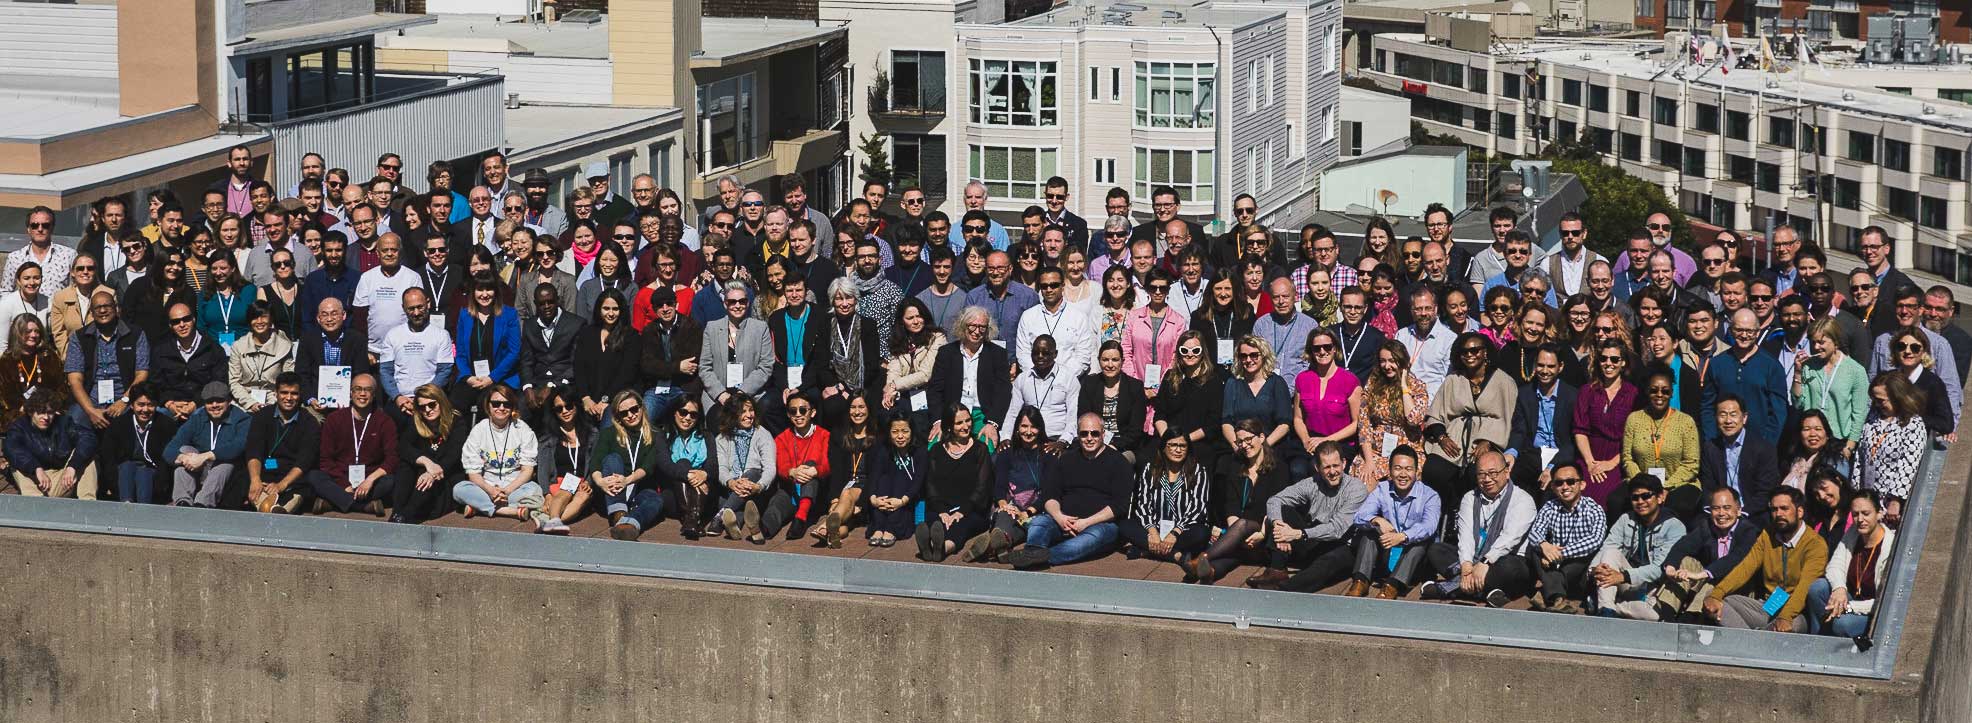 group photo of 2019 TechSoup summit attendees